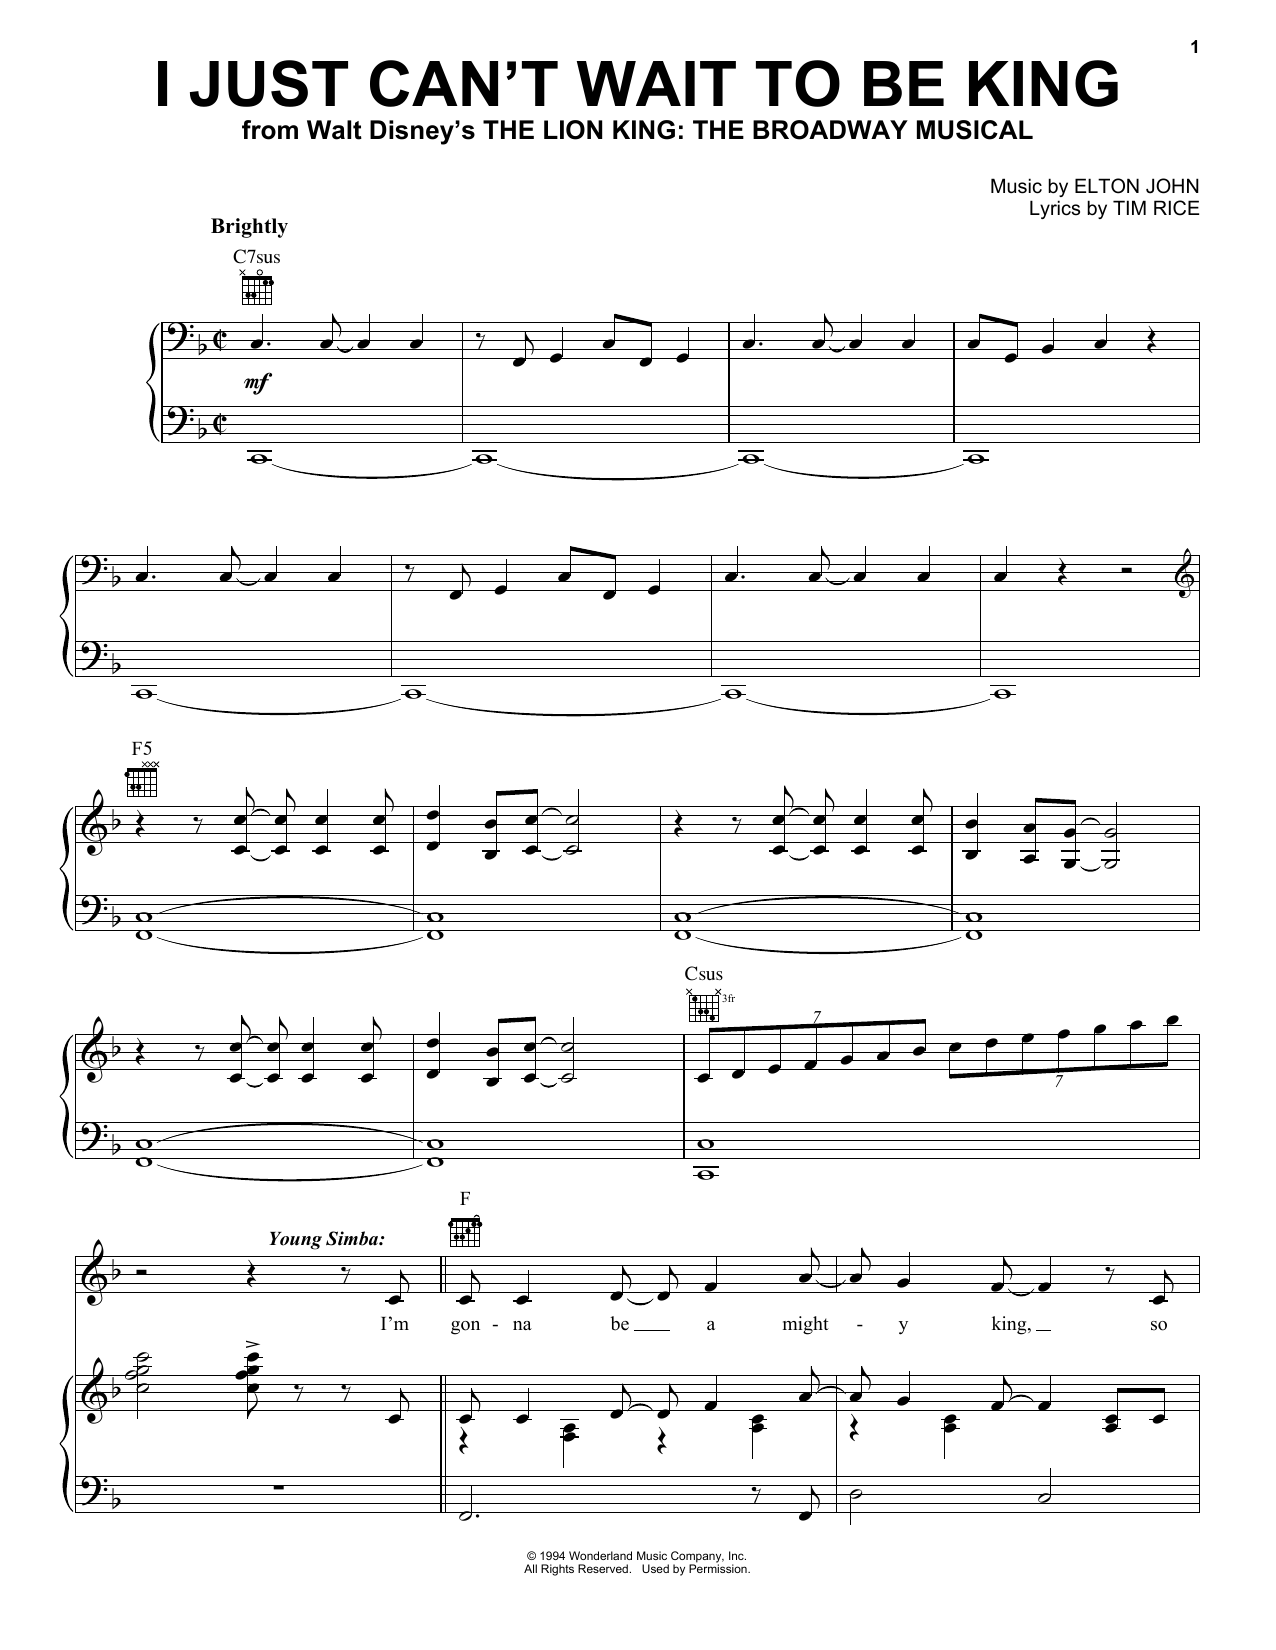 Elton John I Just Can't Wait To Be King (from The Lion King: Broadway Musical) sheet music notes printable PDF score